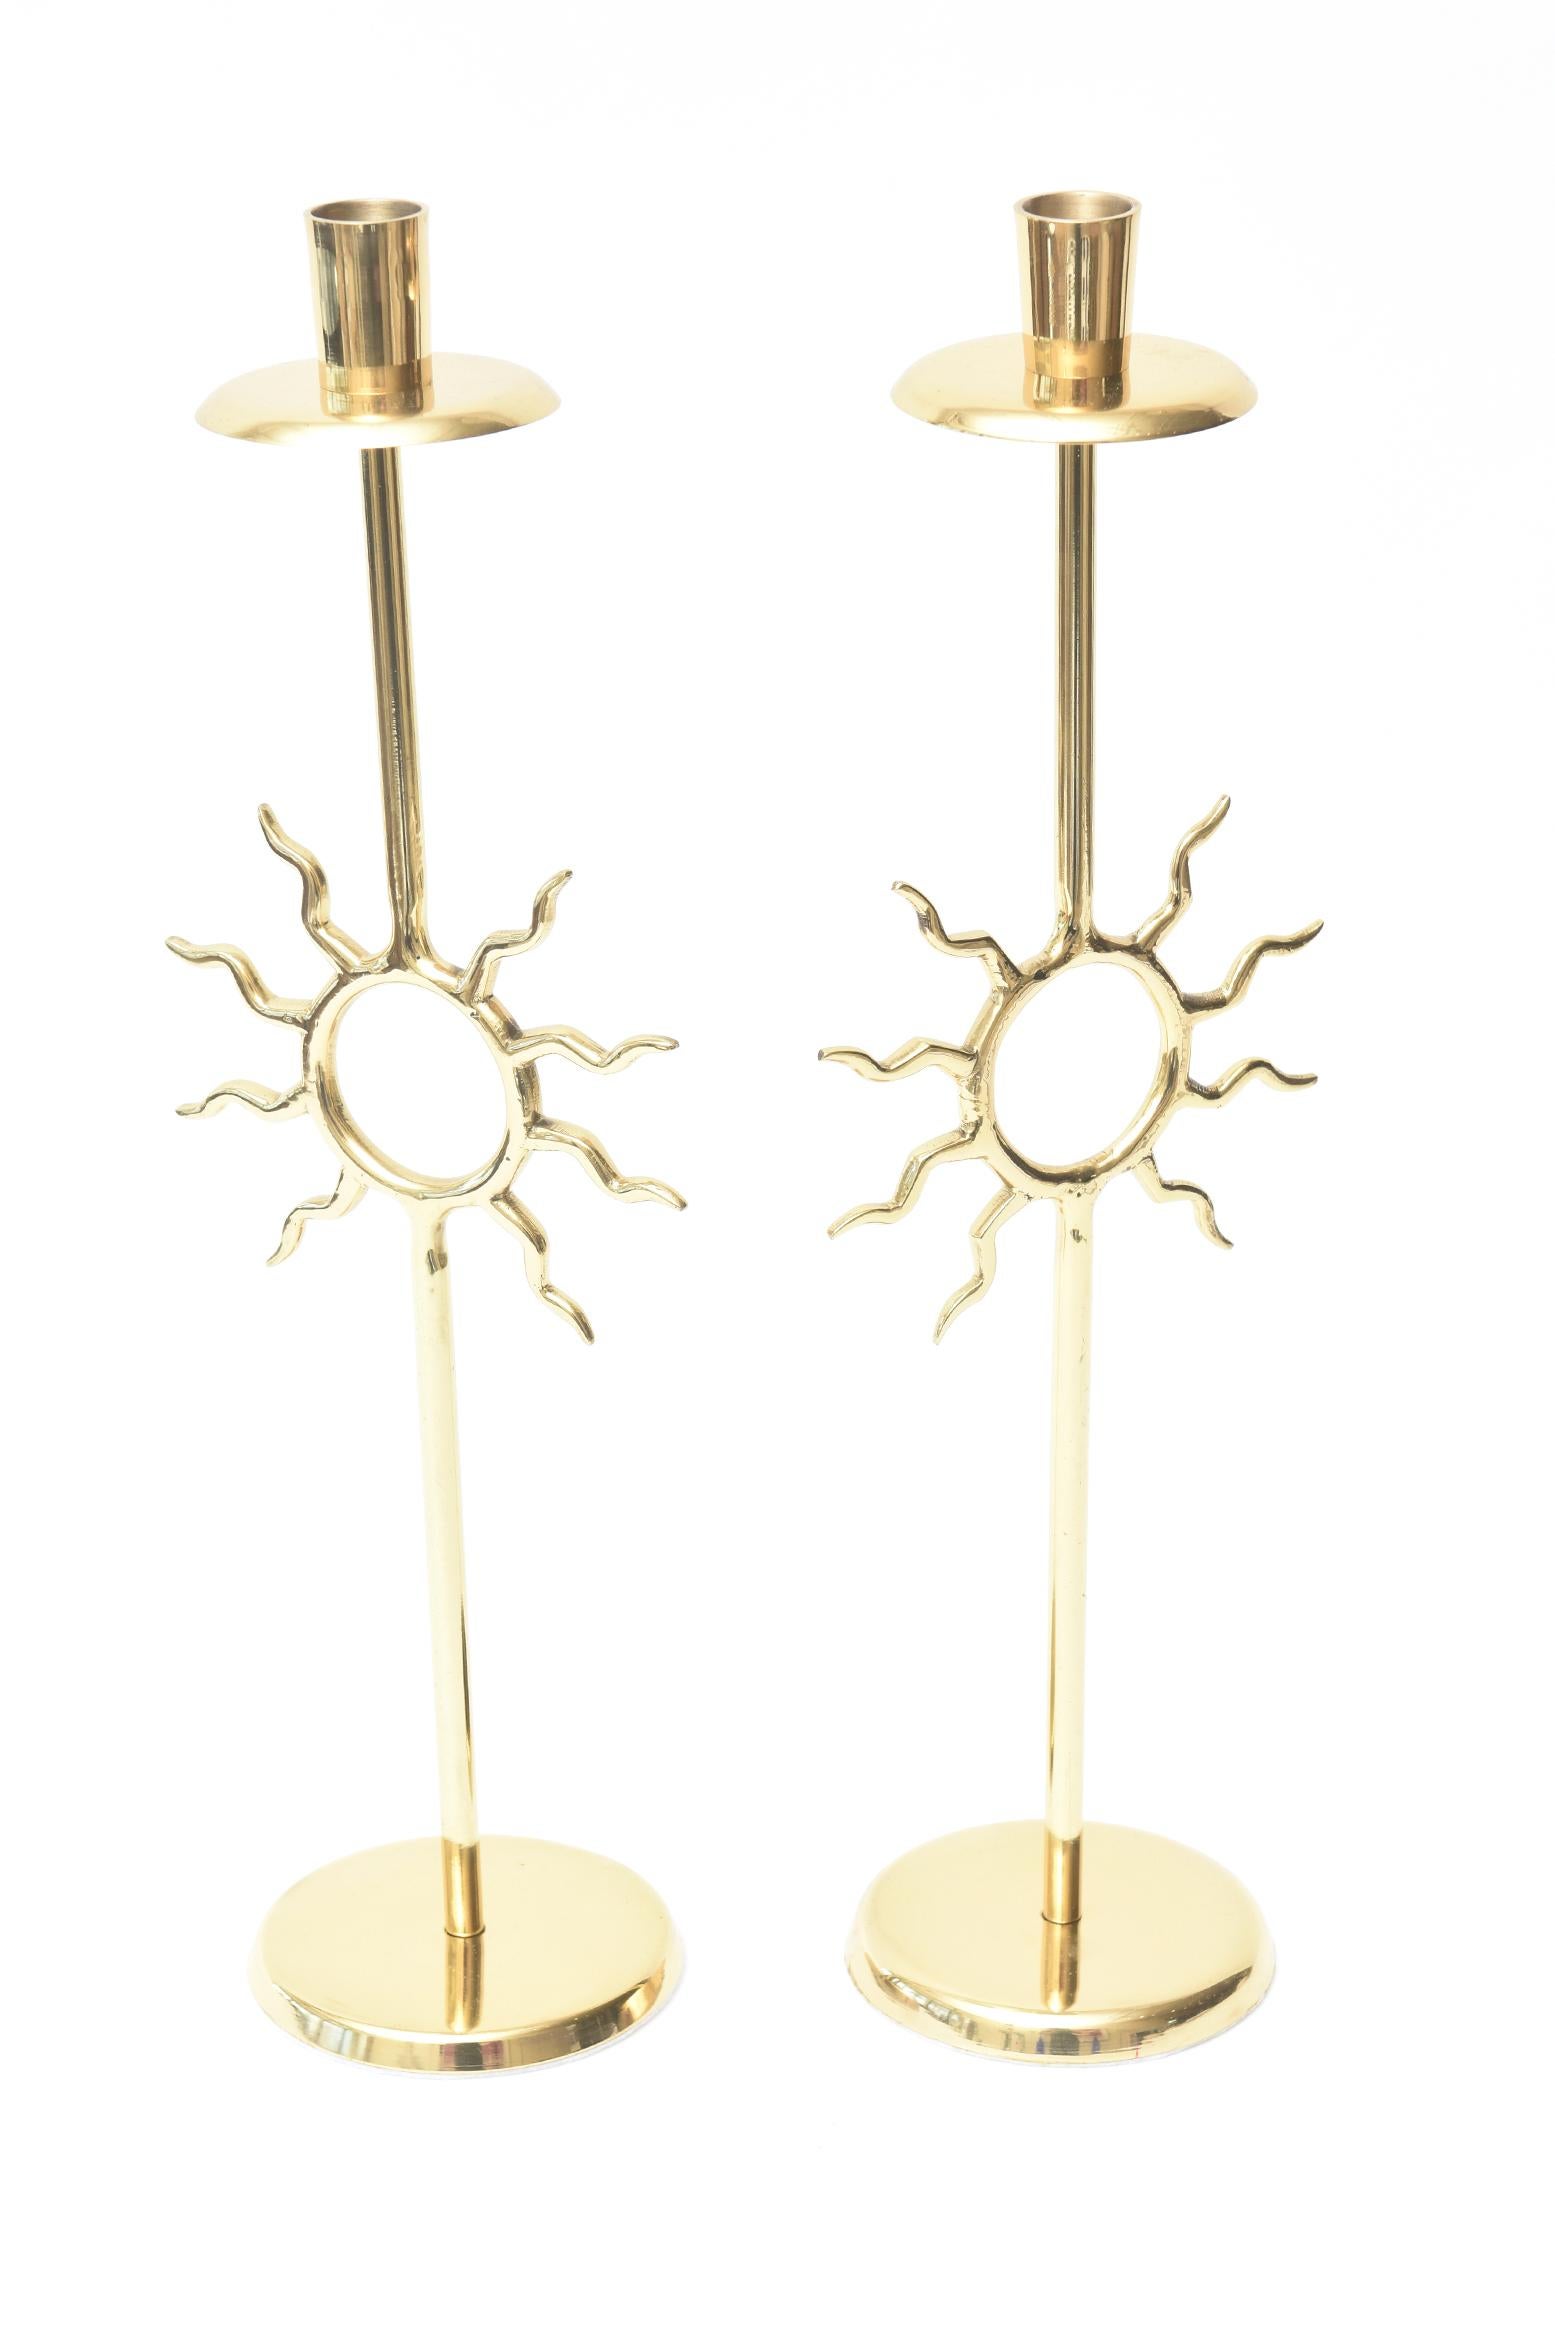 These wonderful pair of vintage brass candlesticks are very Fornasetti style with a bit of Tony Duquette whimsy. The sun motif brings happiness. They are from the 1970s. They have been professionally polished with new white felt on the bottom. They